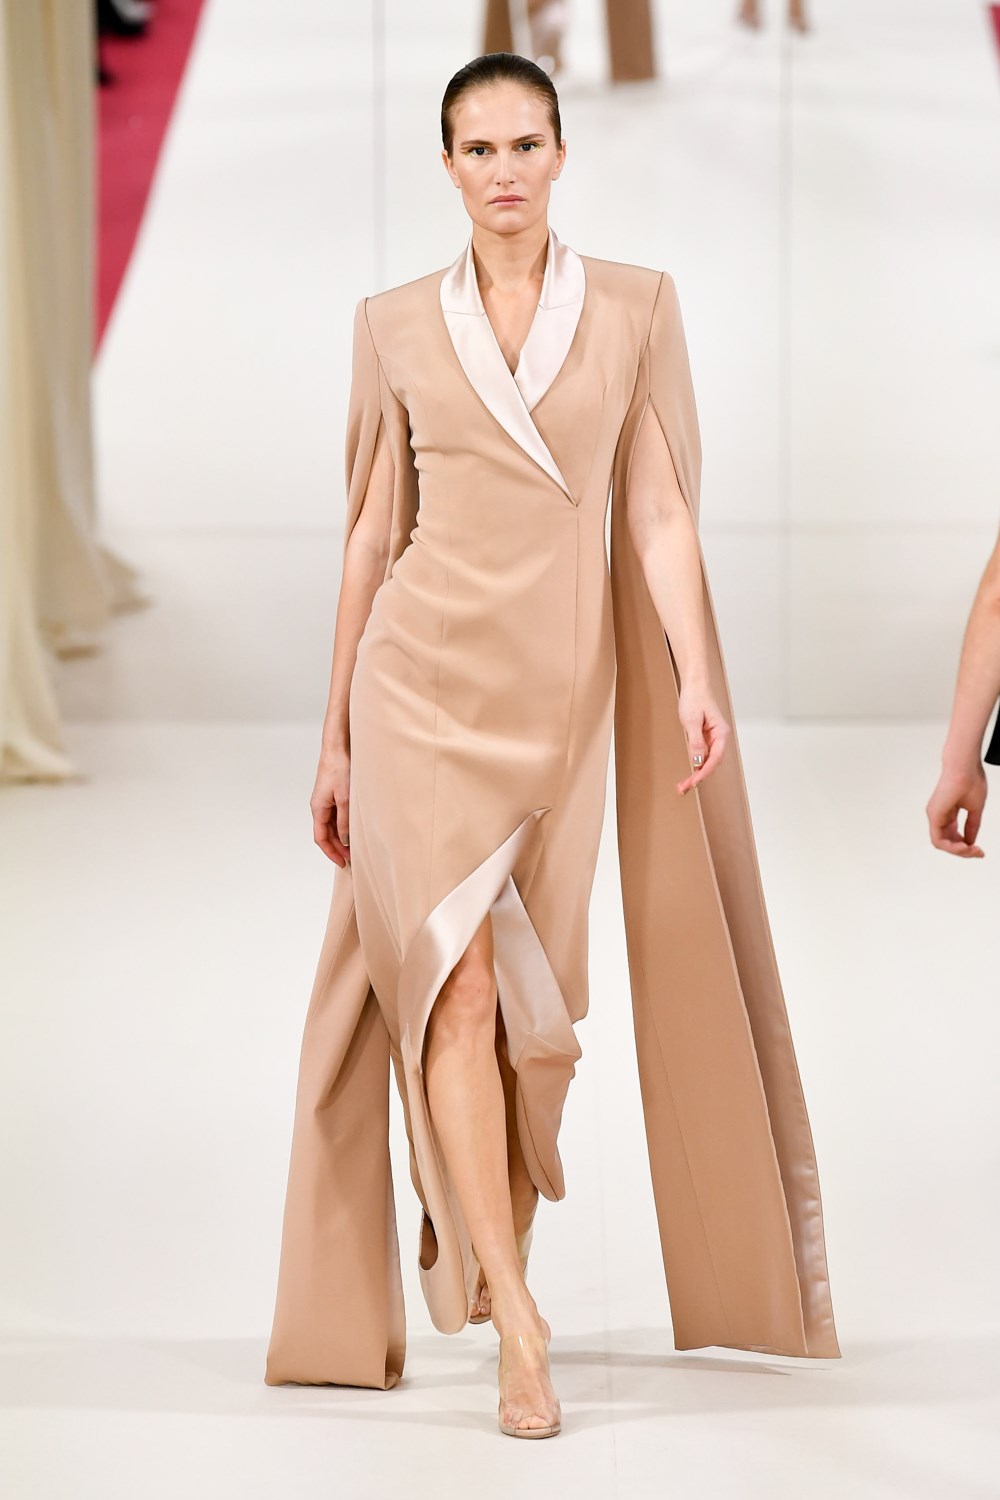 Alexis Mabille Spring 2022 Couture Fashion Show